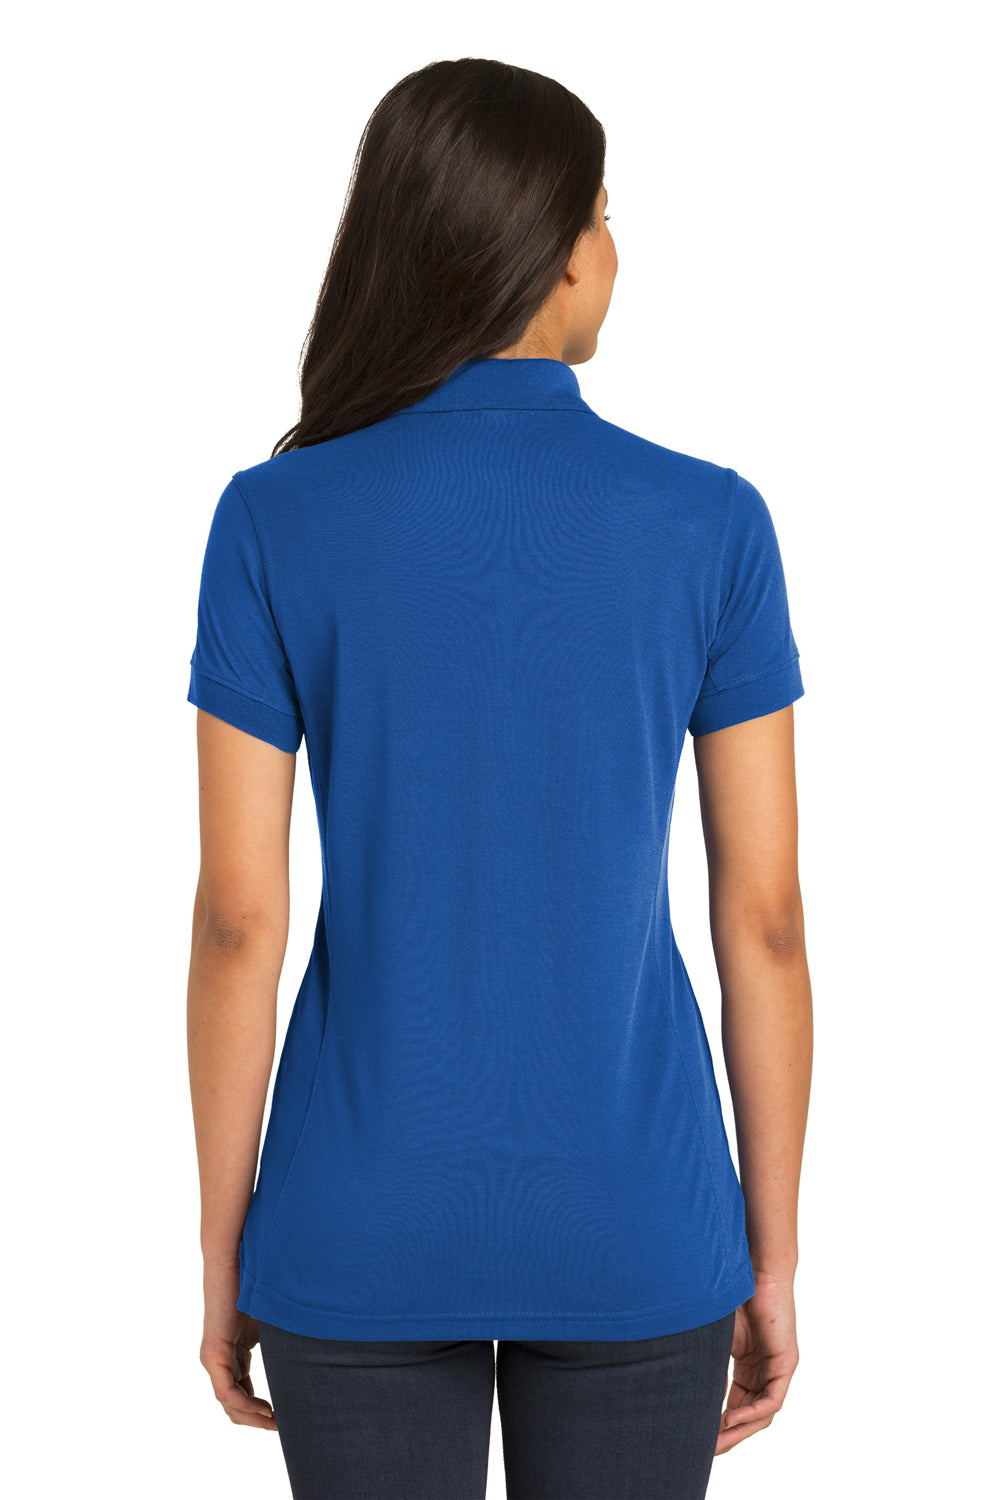 Port Authority L567 Womens 5-in-1 Performance Moisture Wicking Short Sleeve Polo Shirt Royal Blue Back